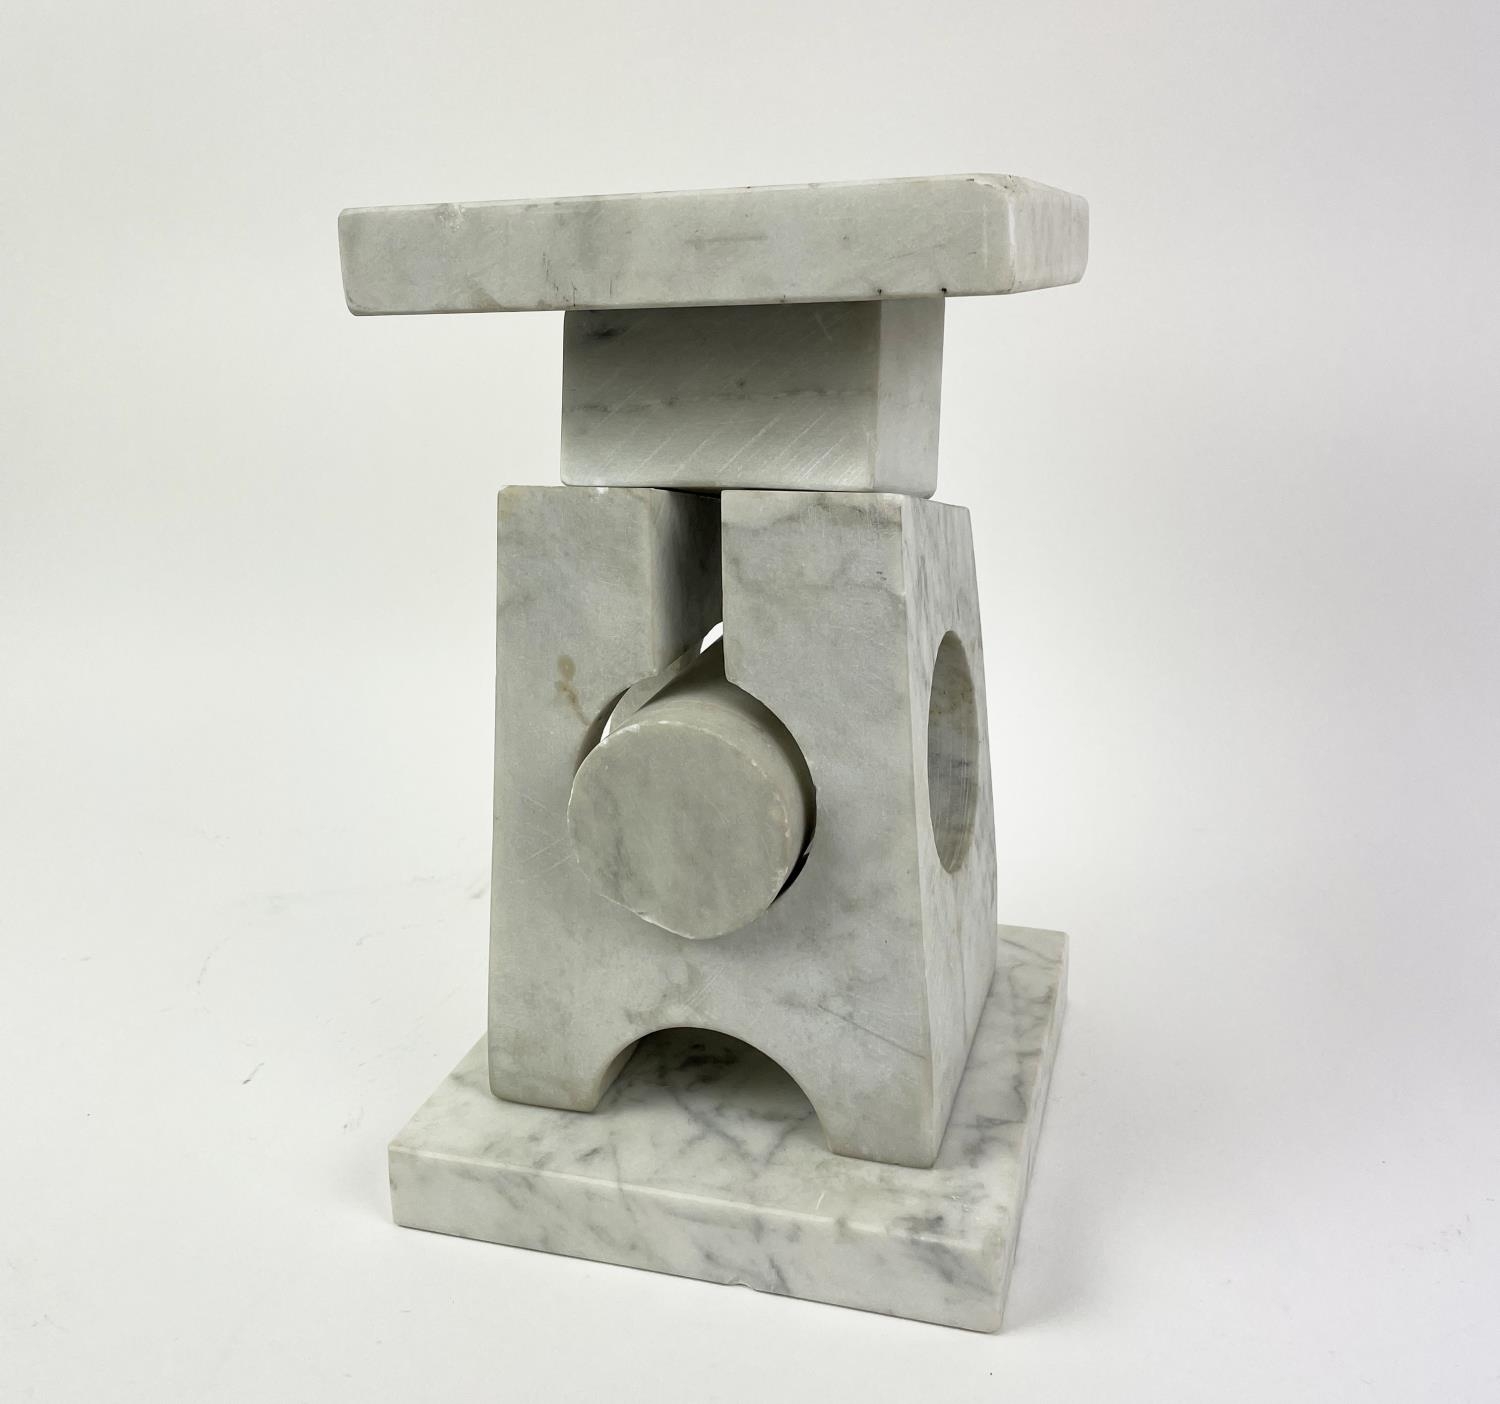 SCULPTURE, marble of adaptable building block form, unknown artist, approx 35cm H x 20cm D x 20cm W. - Image 4 of 5